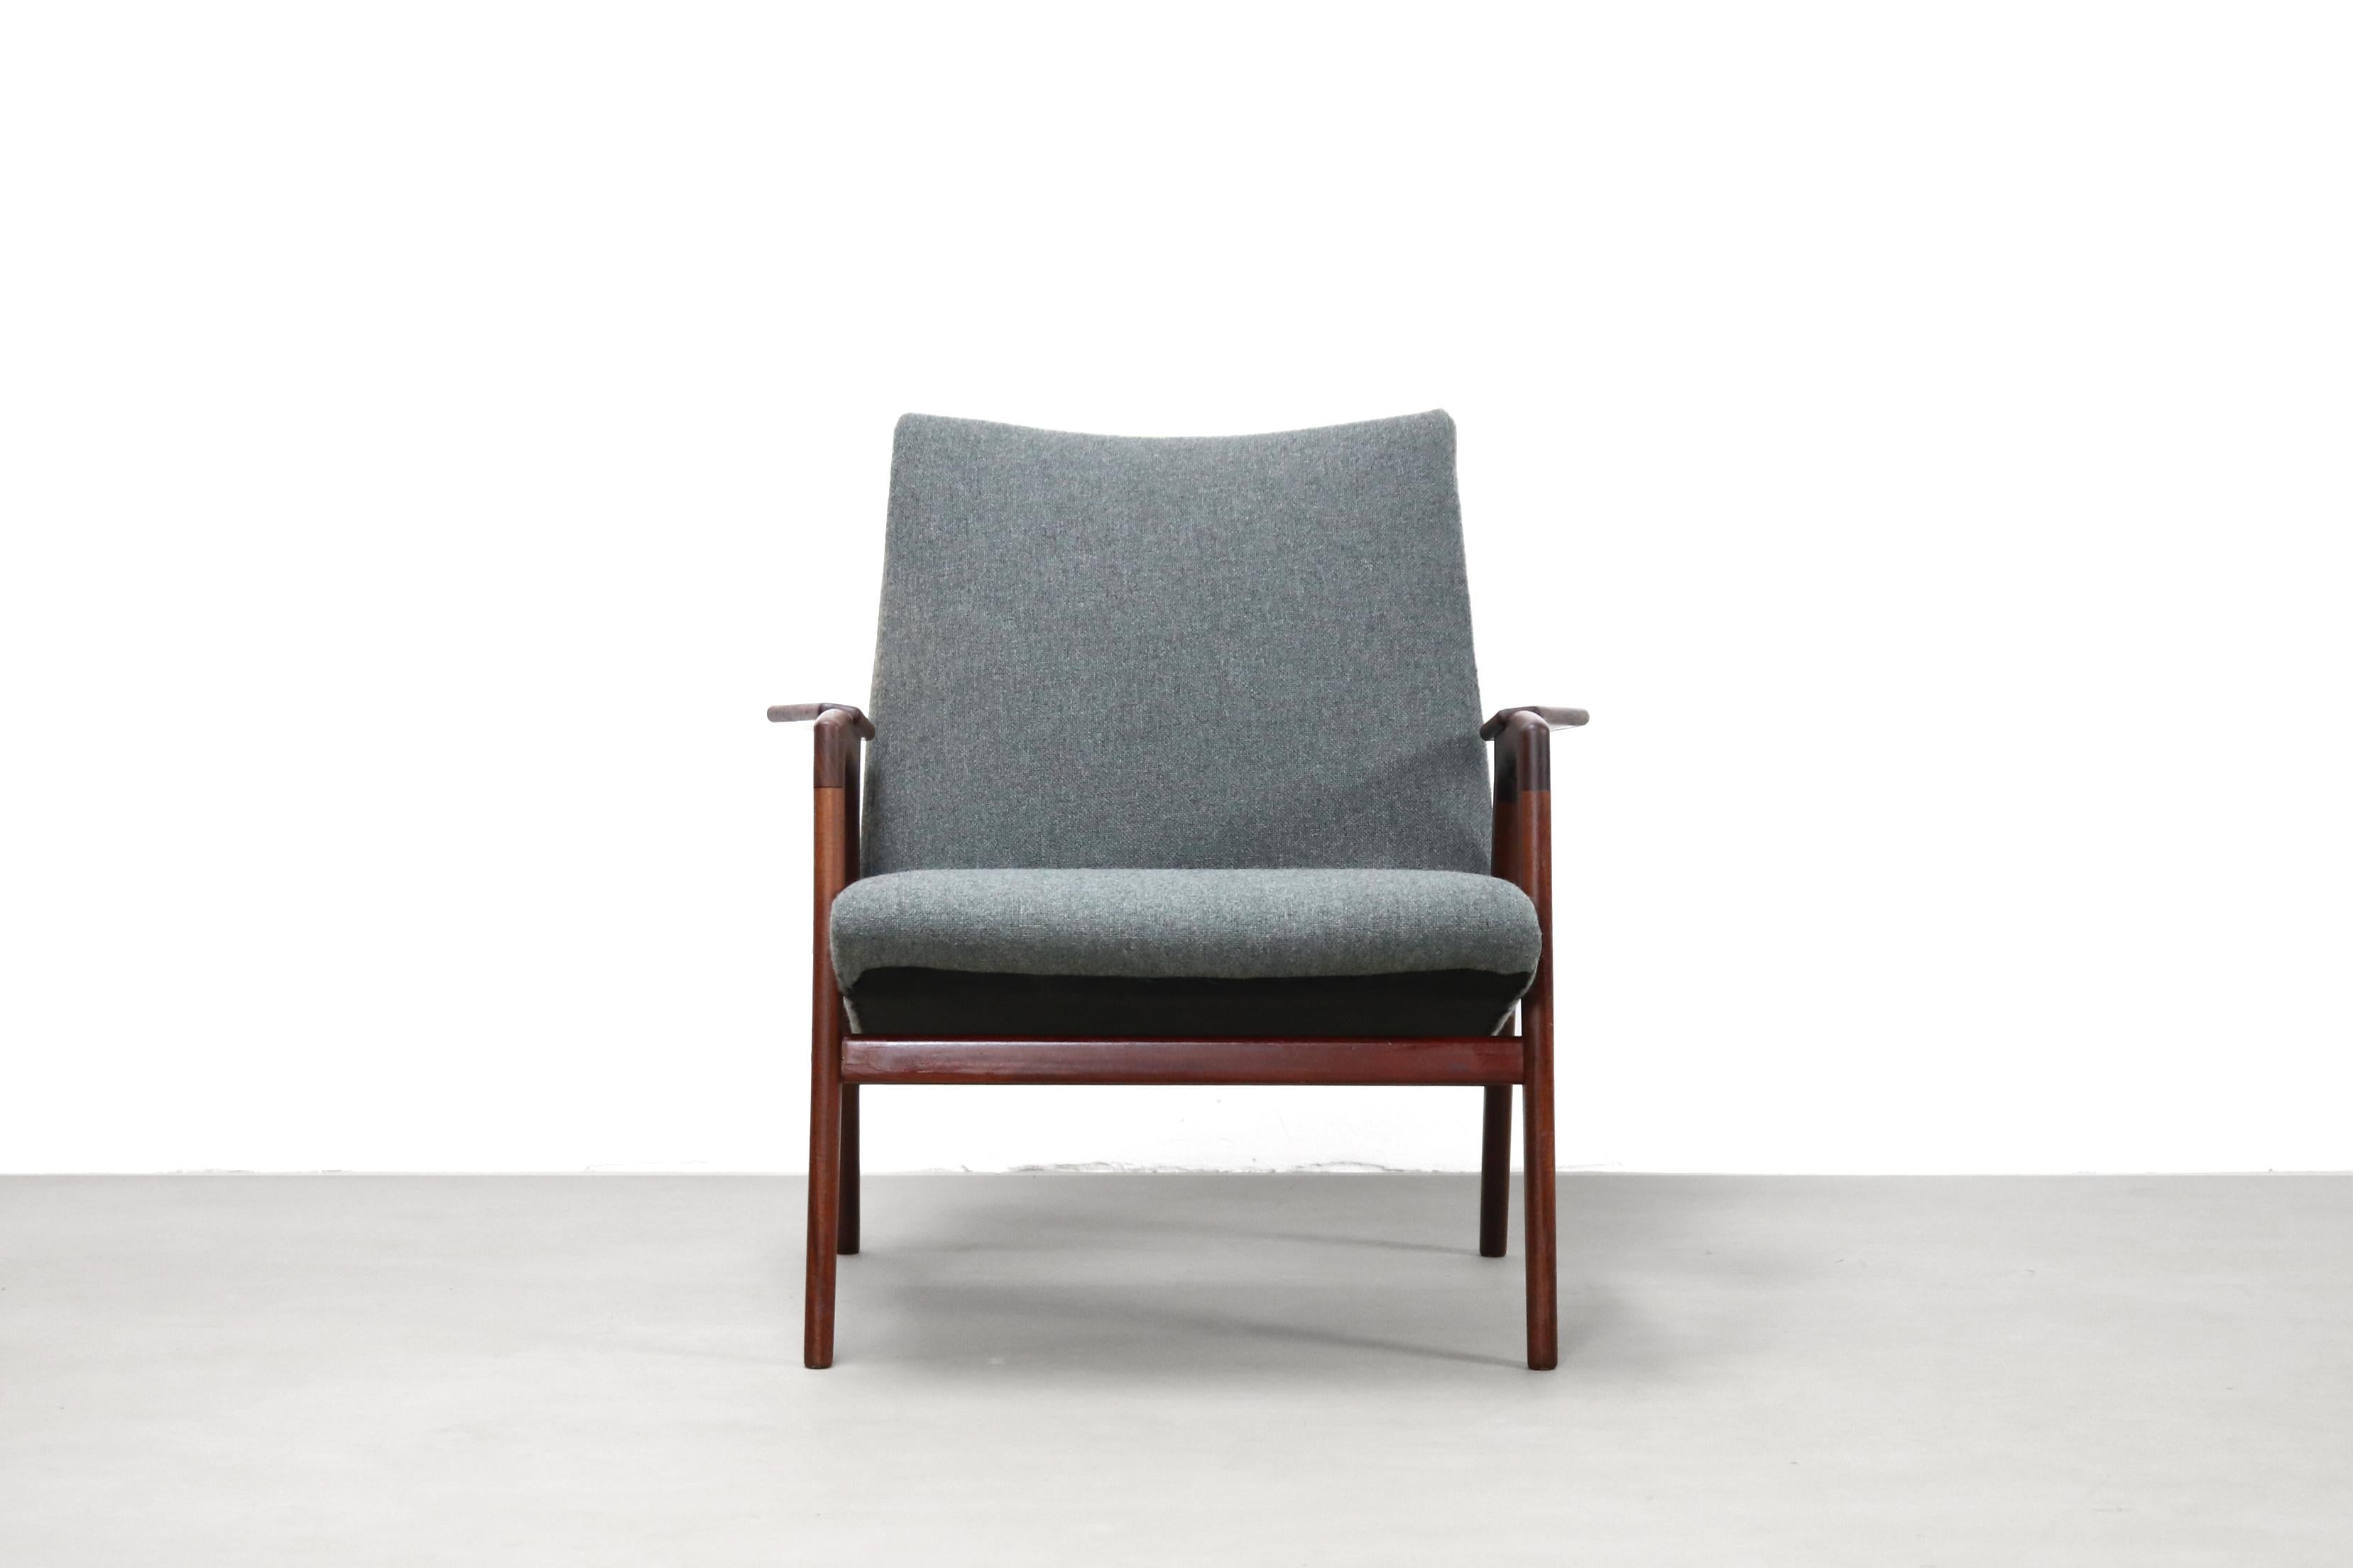 Beautiful and comfortable Ruster armchair designed by the Swedish designer Yngve Ekstrom for Swedese and sold in the Netherlands by Pastoe. It concerns the model with the low backrest, also called the ladies model. The original design of the Ruster